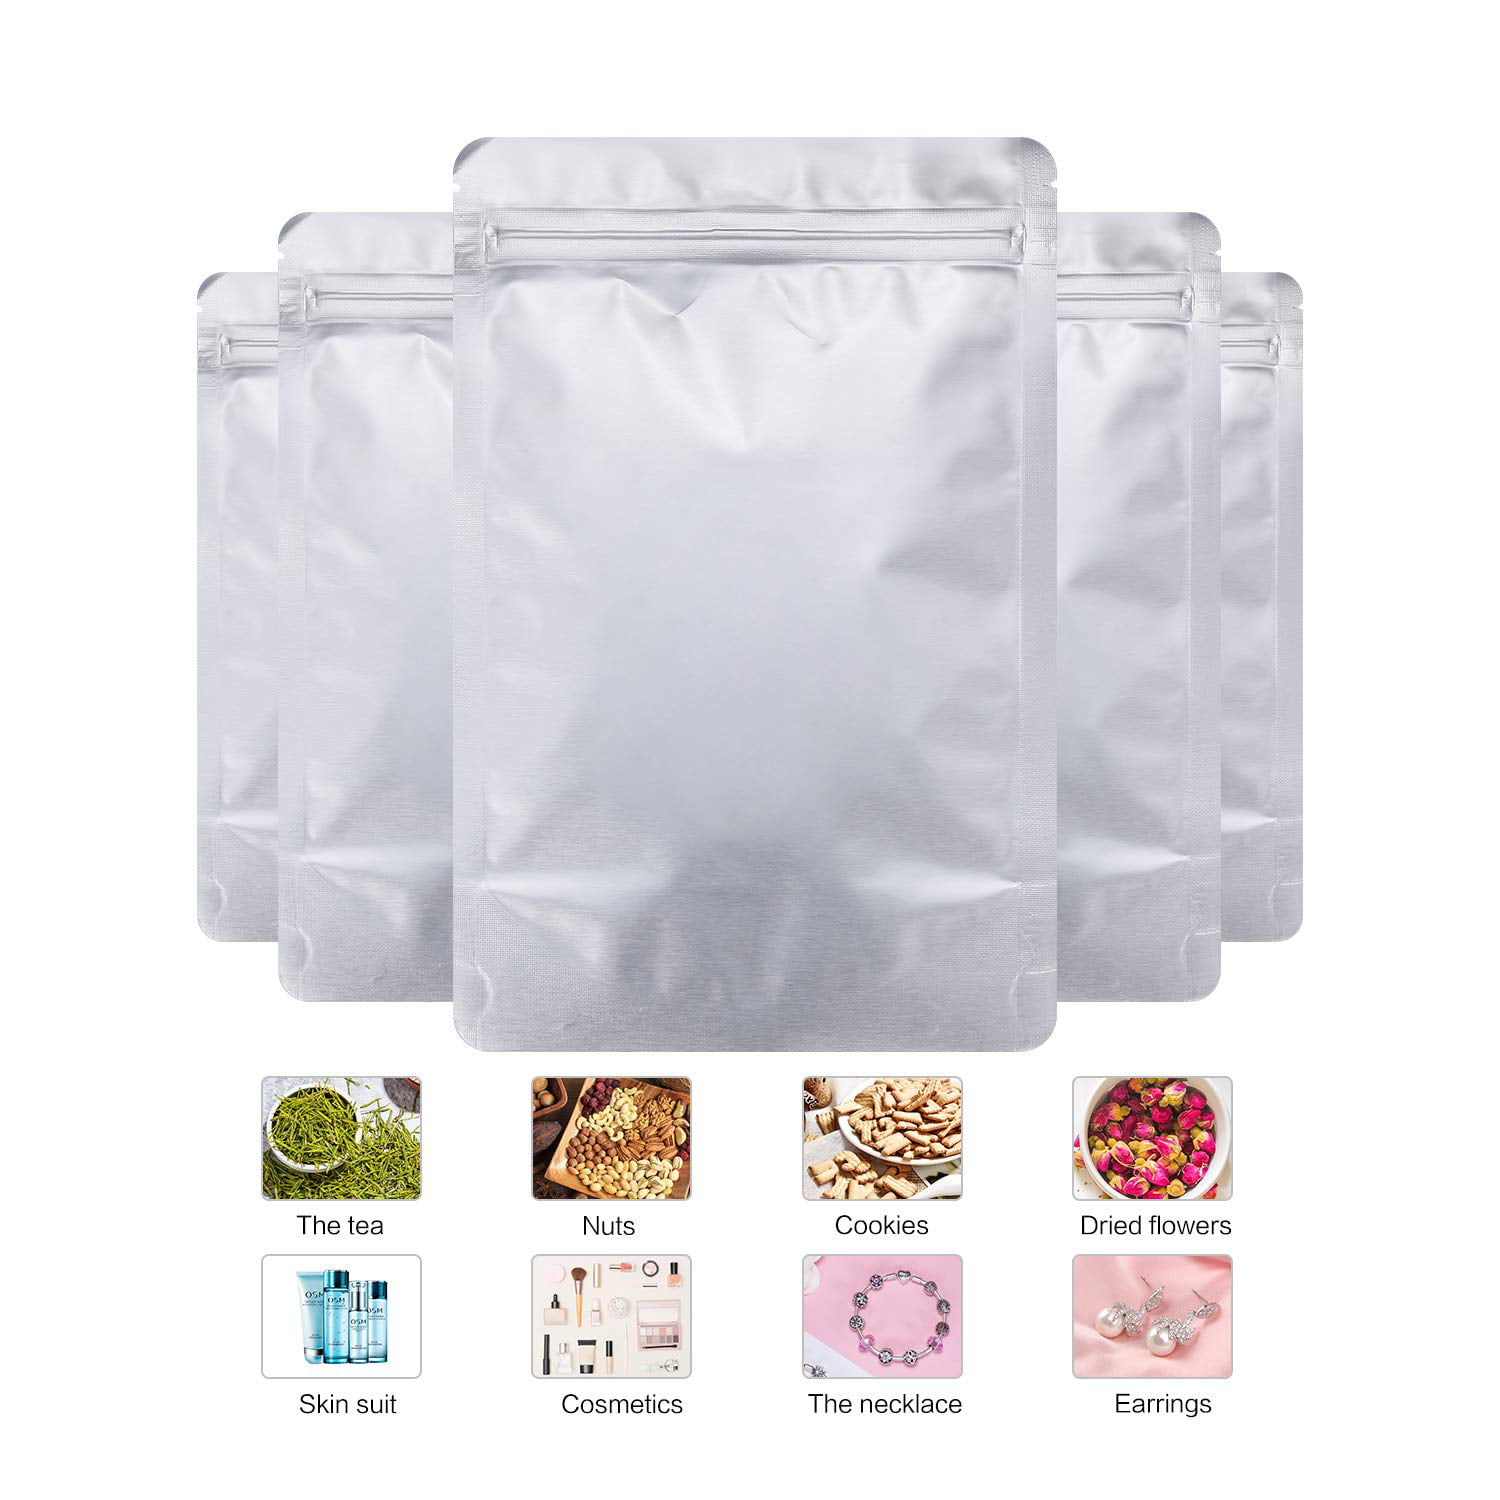 FERENLI 100 Pieces Vacuum Sealer Bags for Food Storage Open Top Clear  Plastic Flat Pouches Bulk Food Packaging Bags with Tear Notch 4.7x6.7 inch